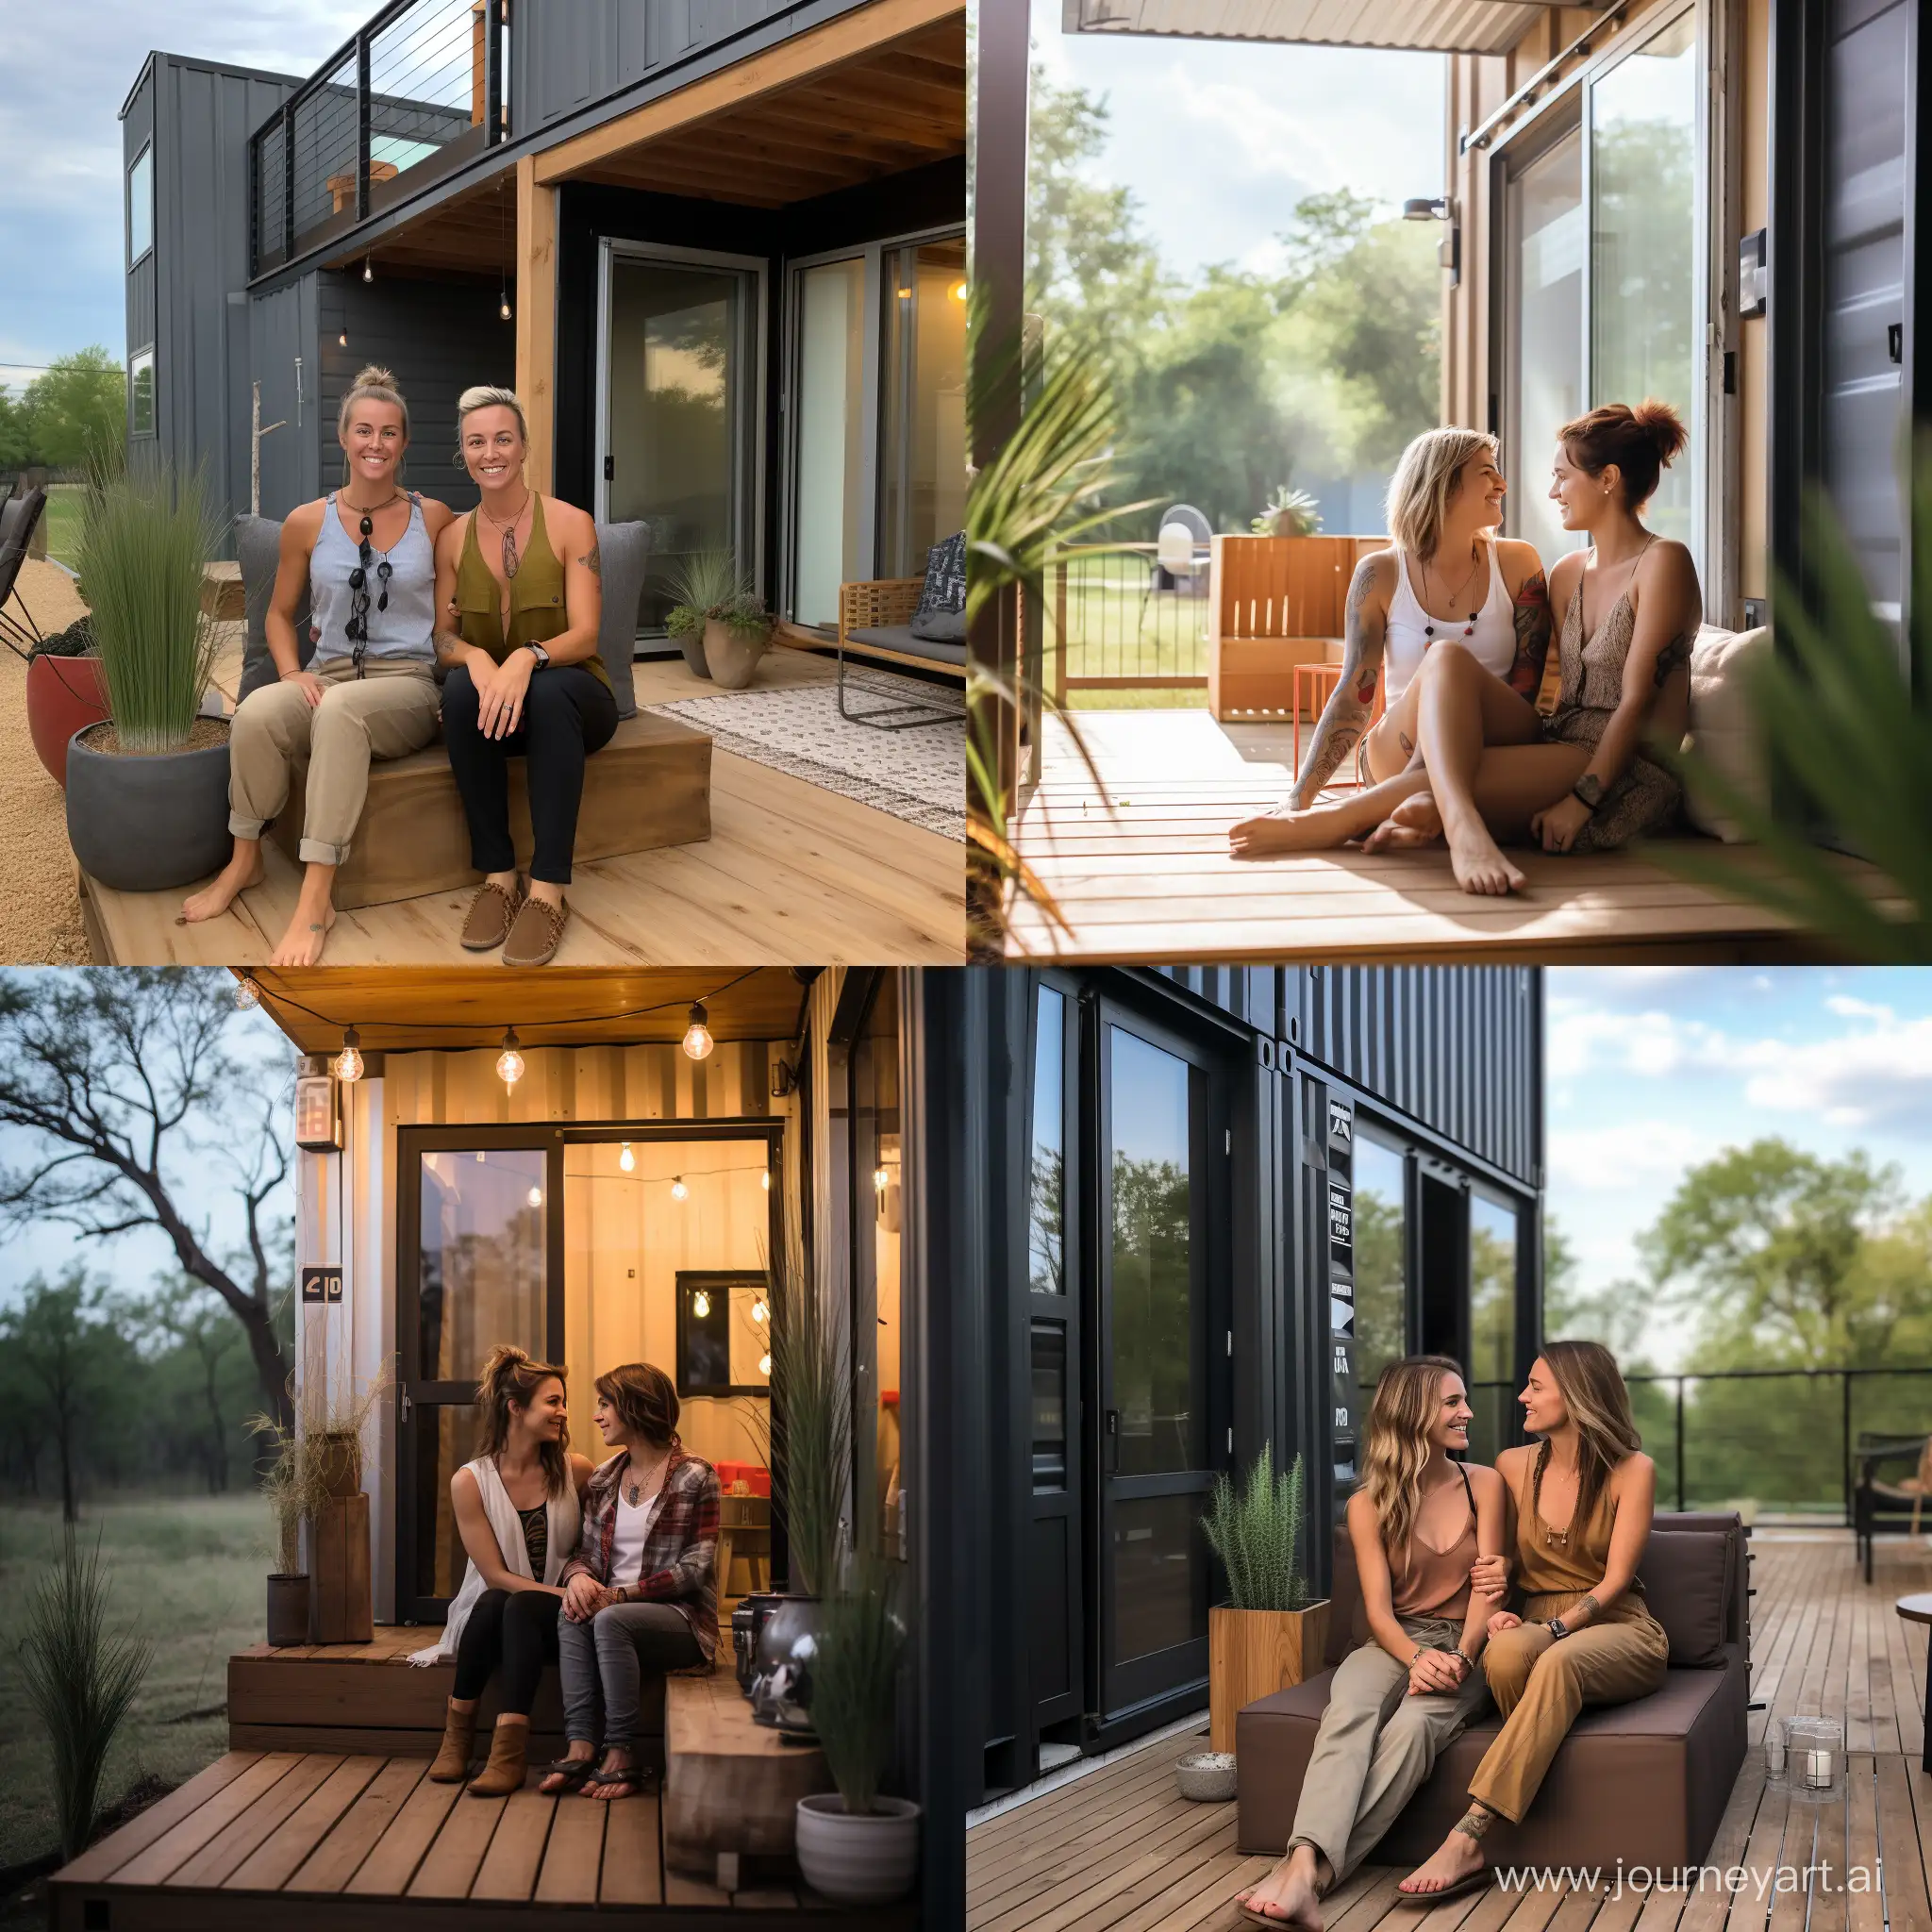 Lesbian-Architect-Couple-in-Modern-Container-Home-Porch